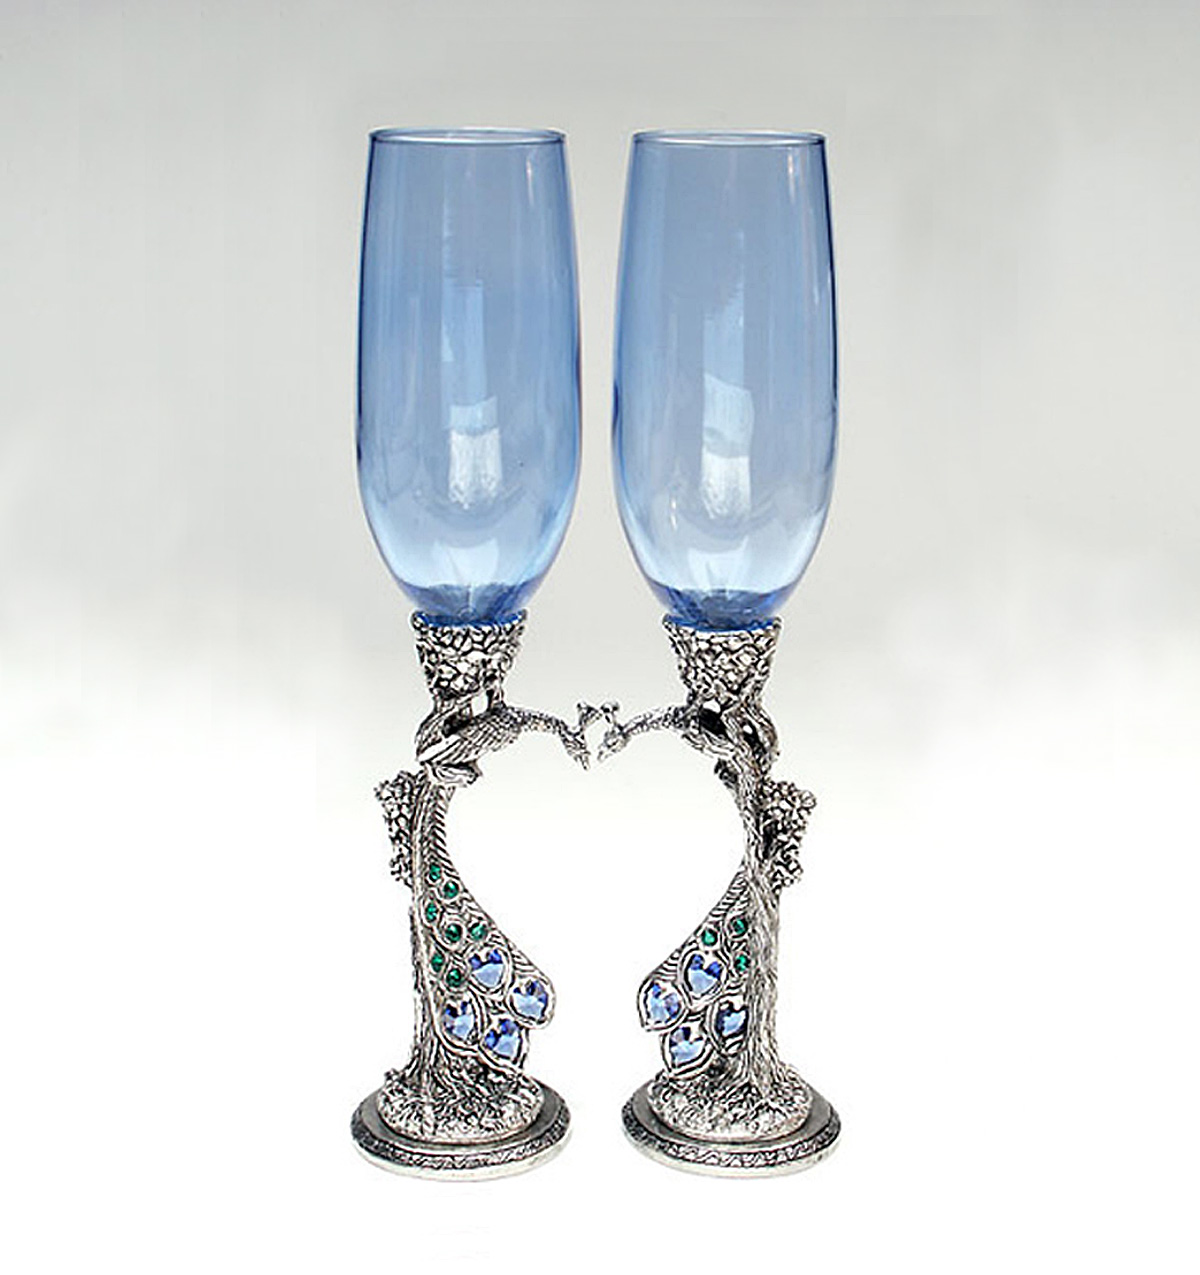 Blue toasting glasses with peacock stems and Austrian crystals